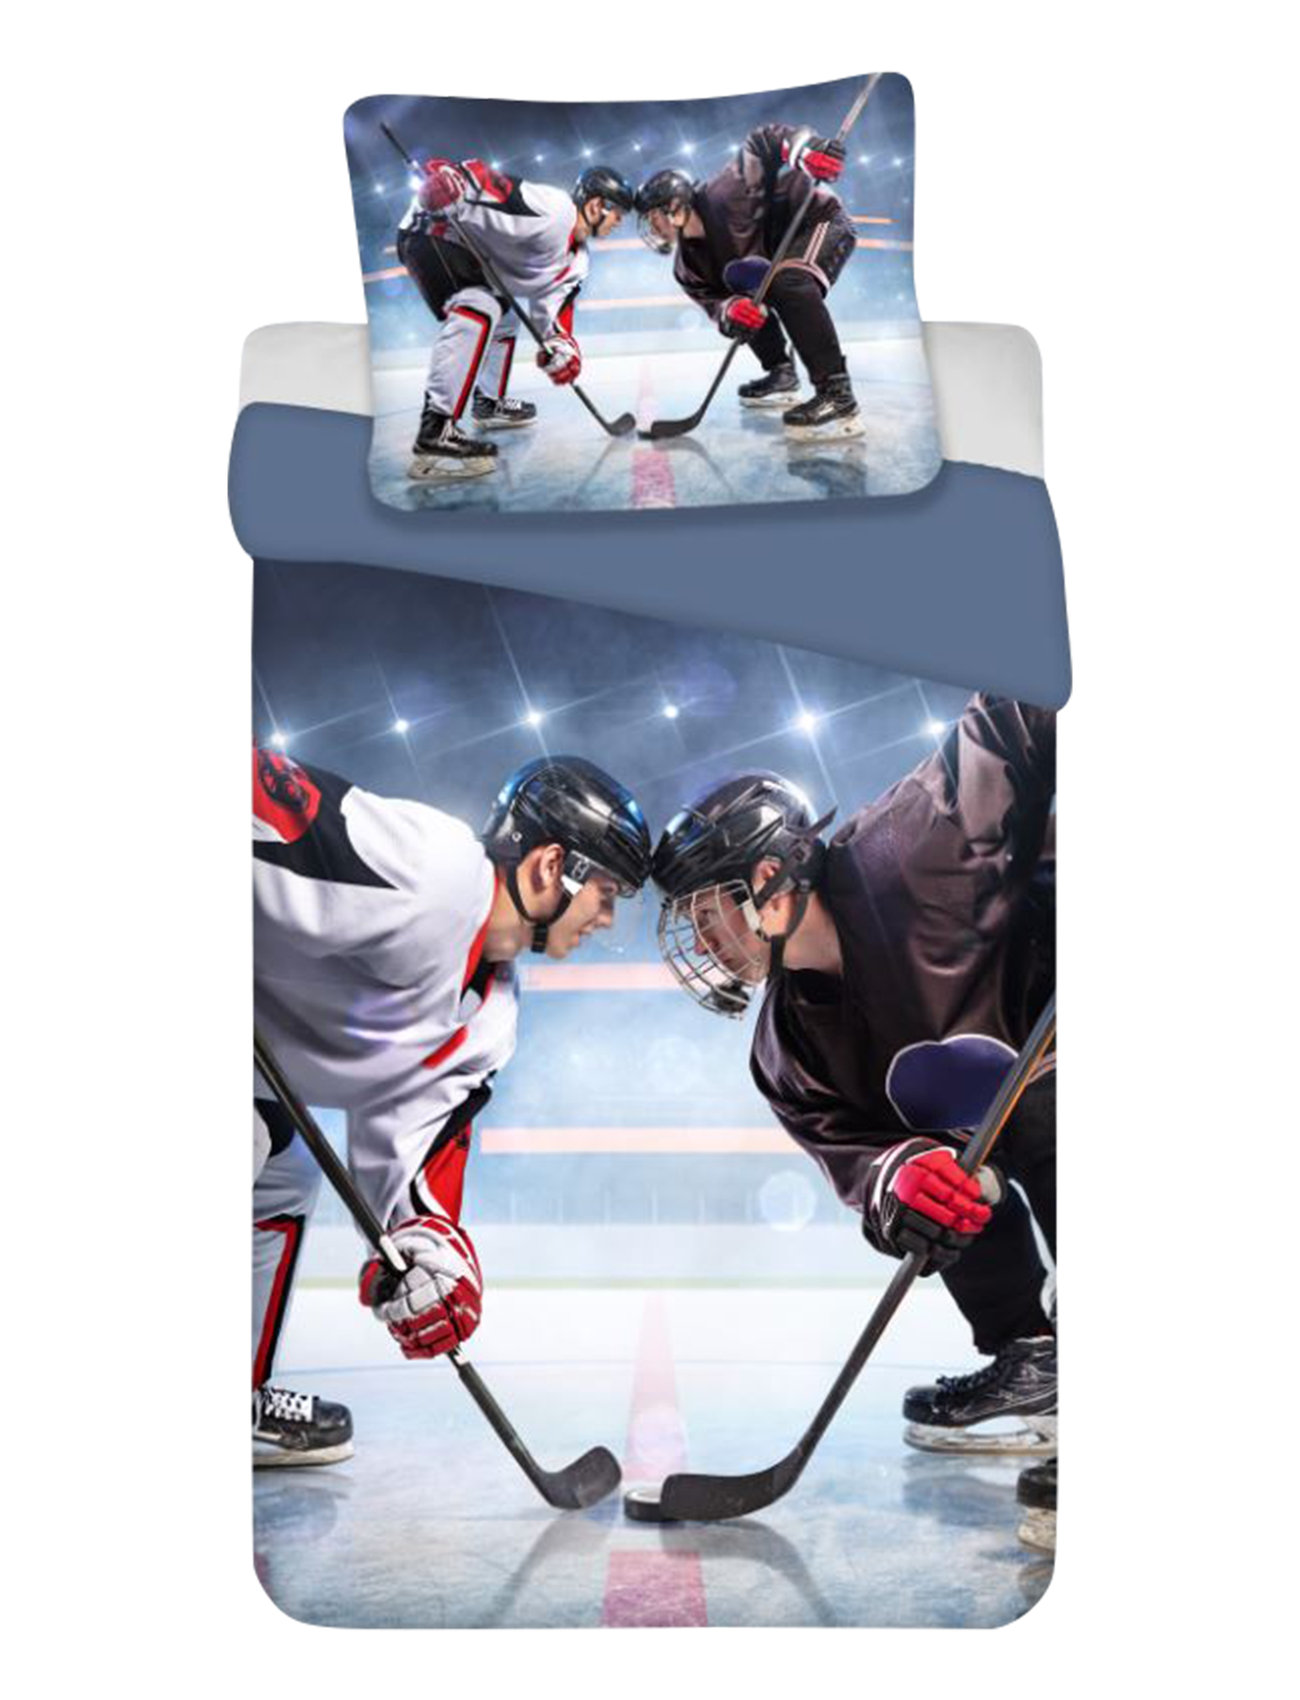 Bed Linen Nb 2200 Ice Hockey - 140X200, 60X63 Cm Home Sleep Time Bed Sets Multi/patterned BrandMac